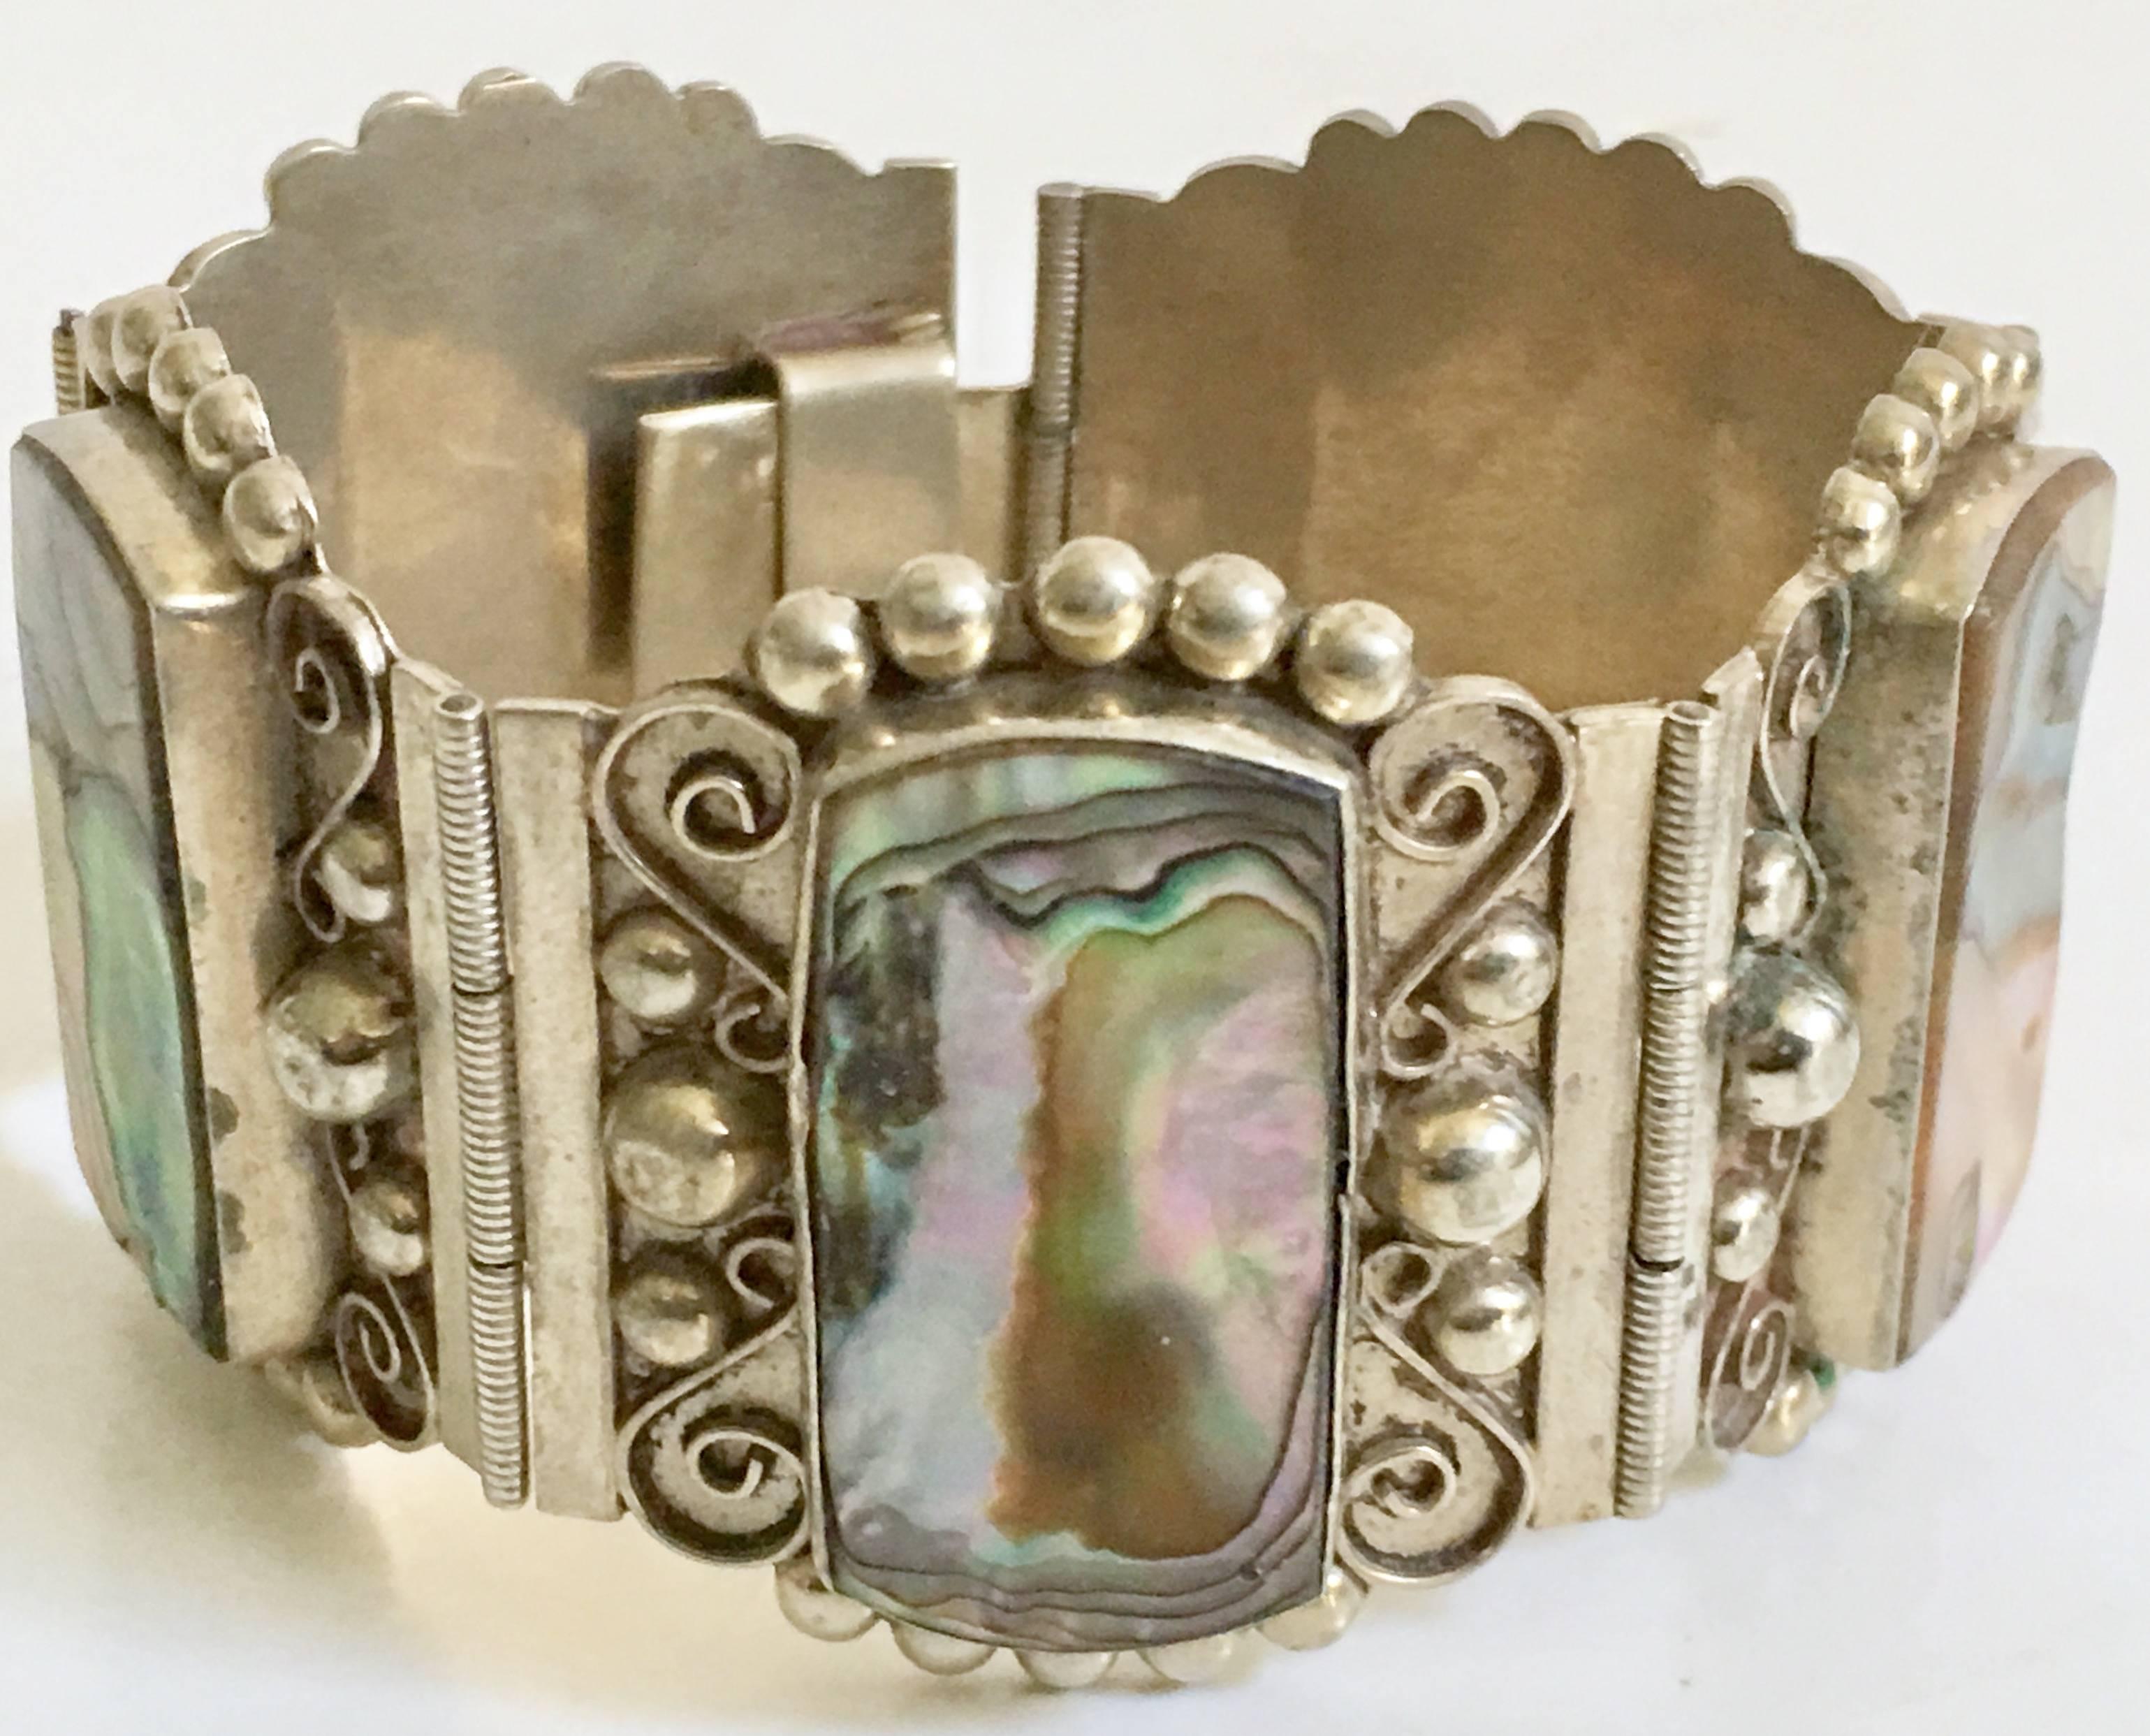 Mid-Century Taxco-Mexico Sterling Silver & Abalone Shell 5 Panel Bracelet, Signed. This exquisitely crafted piece of art has five panels with sterling silver bead and filigree work. Each panel has a raised bezel set abalone shell stone of